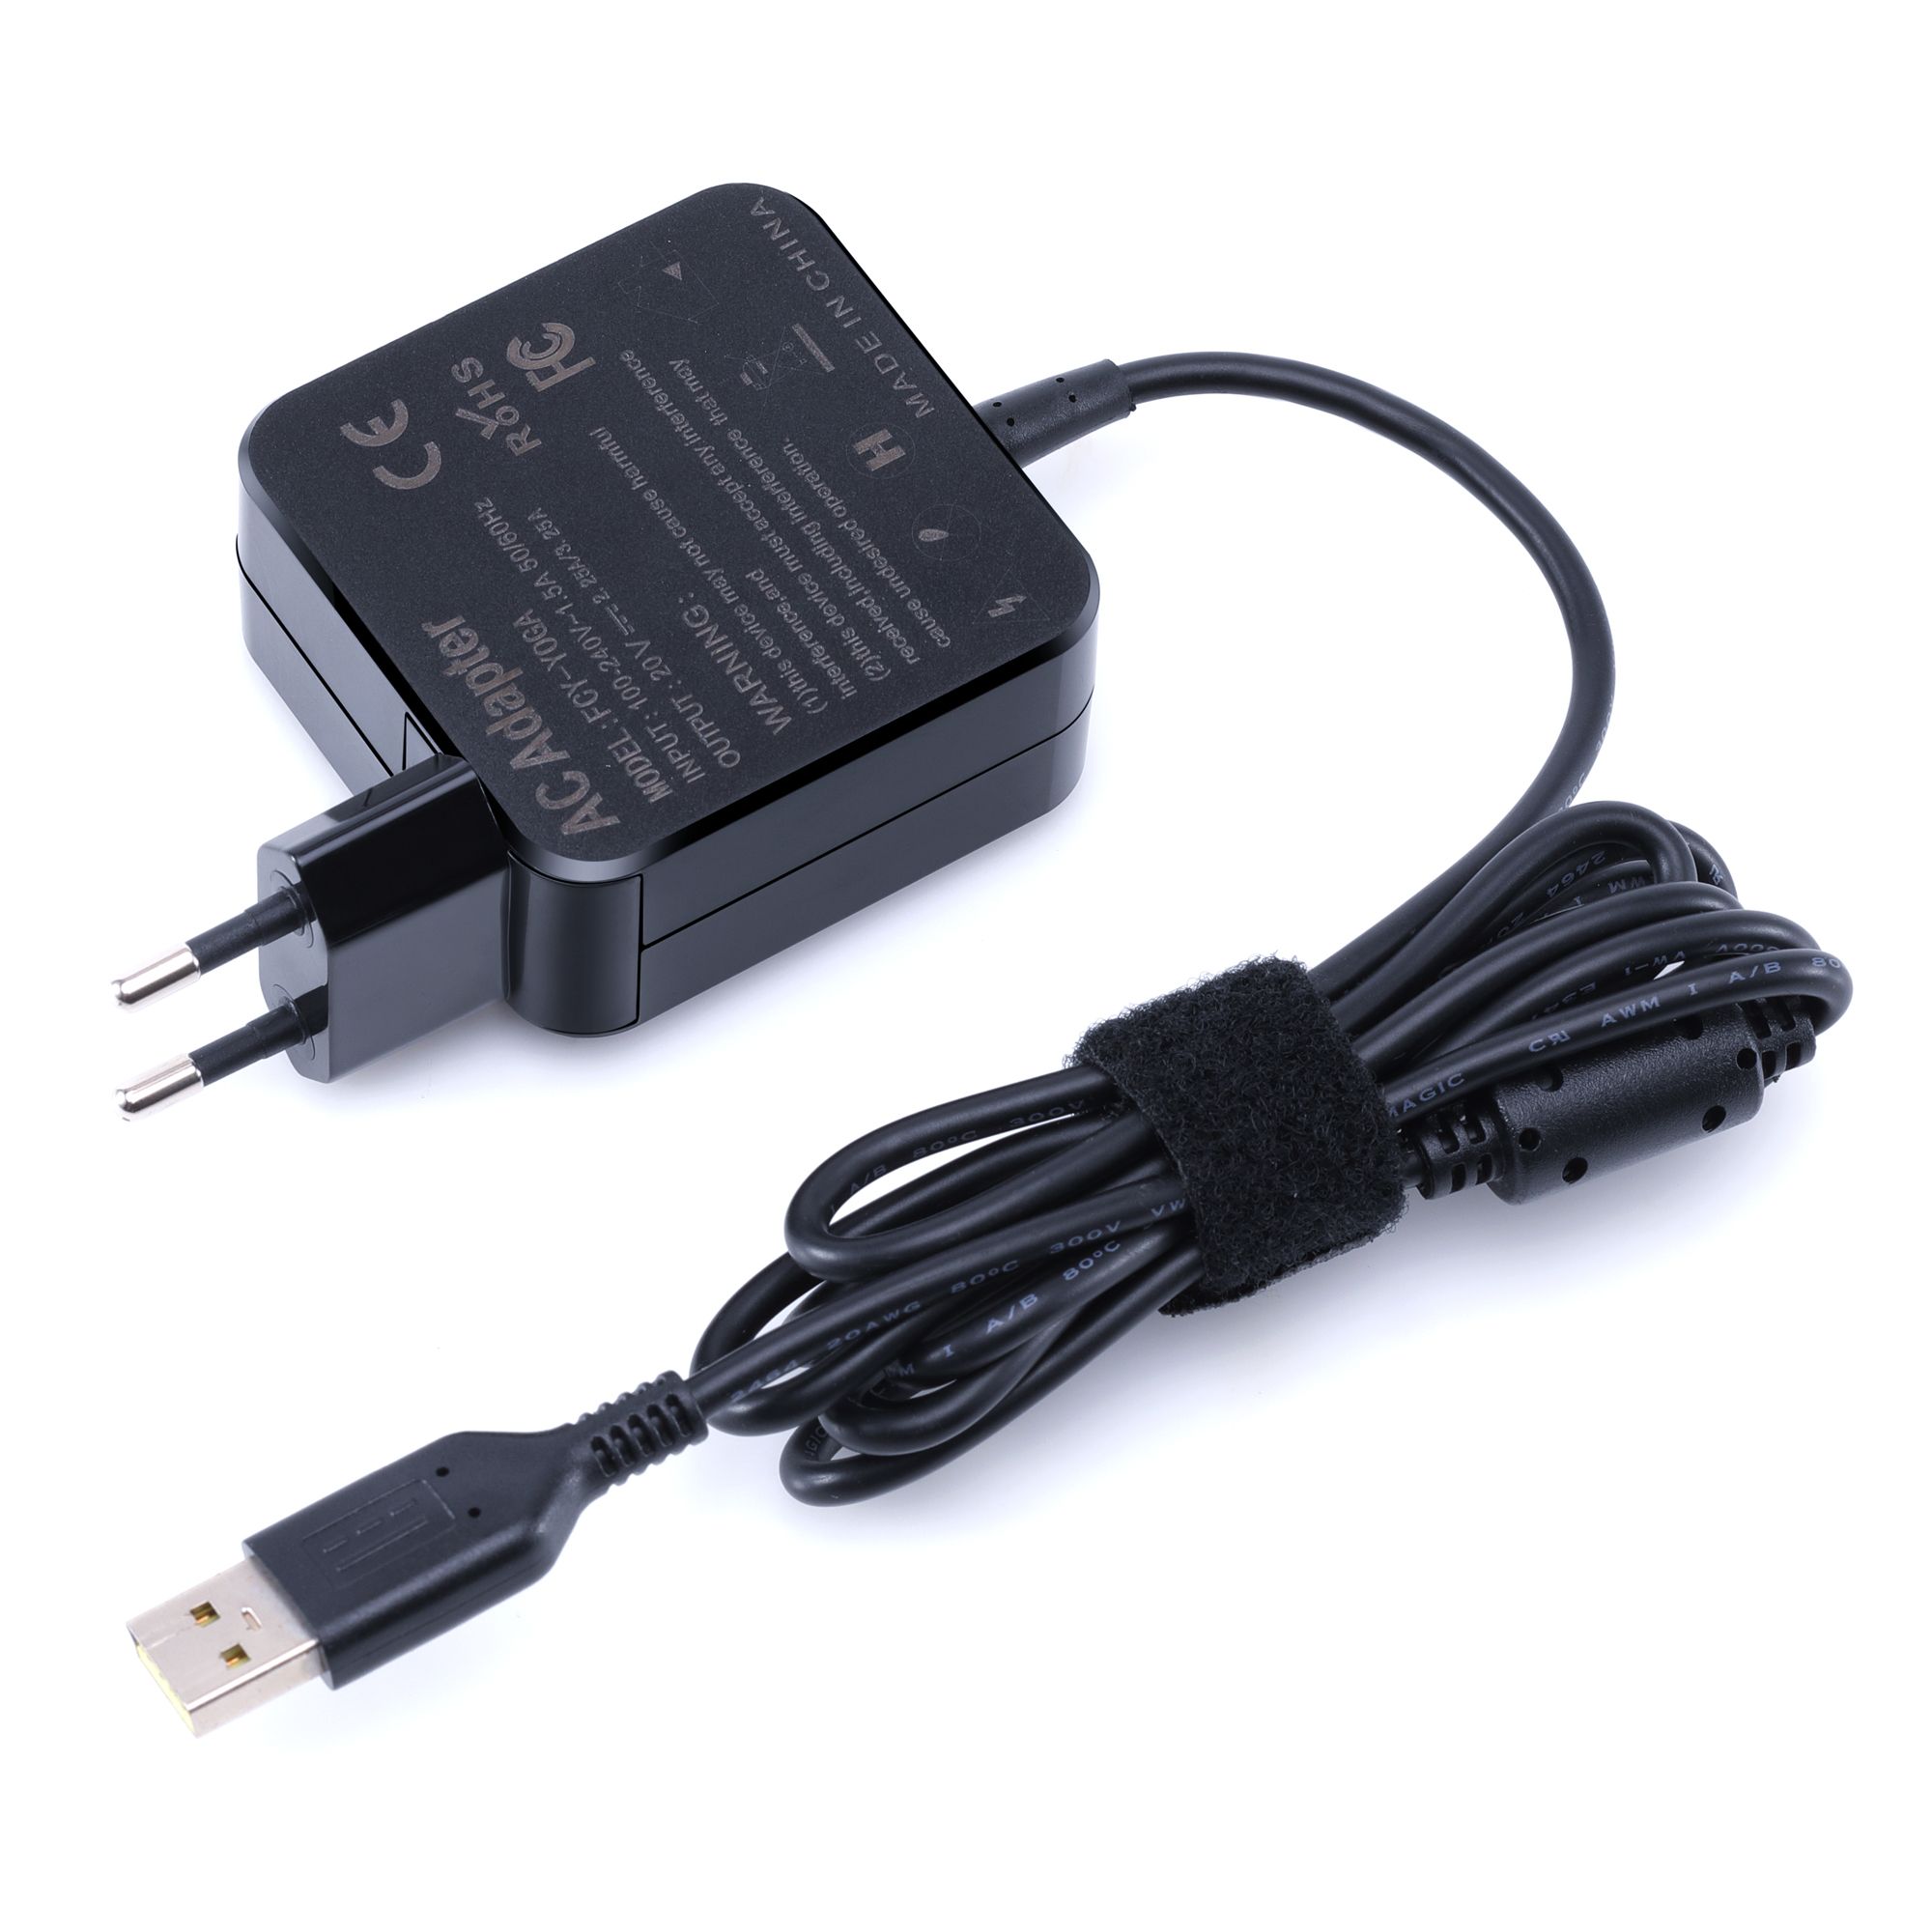 Fothwin-20V-325A-65W-Interface-Yoga-3-14-Yoga-900-700-Laptop-AC-Power-Adapter-Notebook-Charger-For-L-1454298